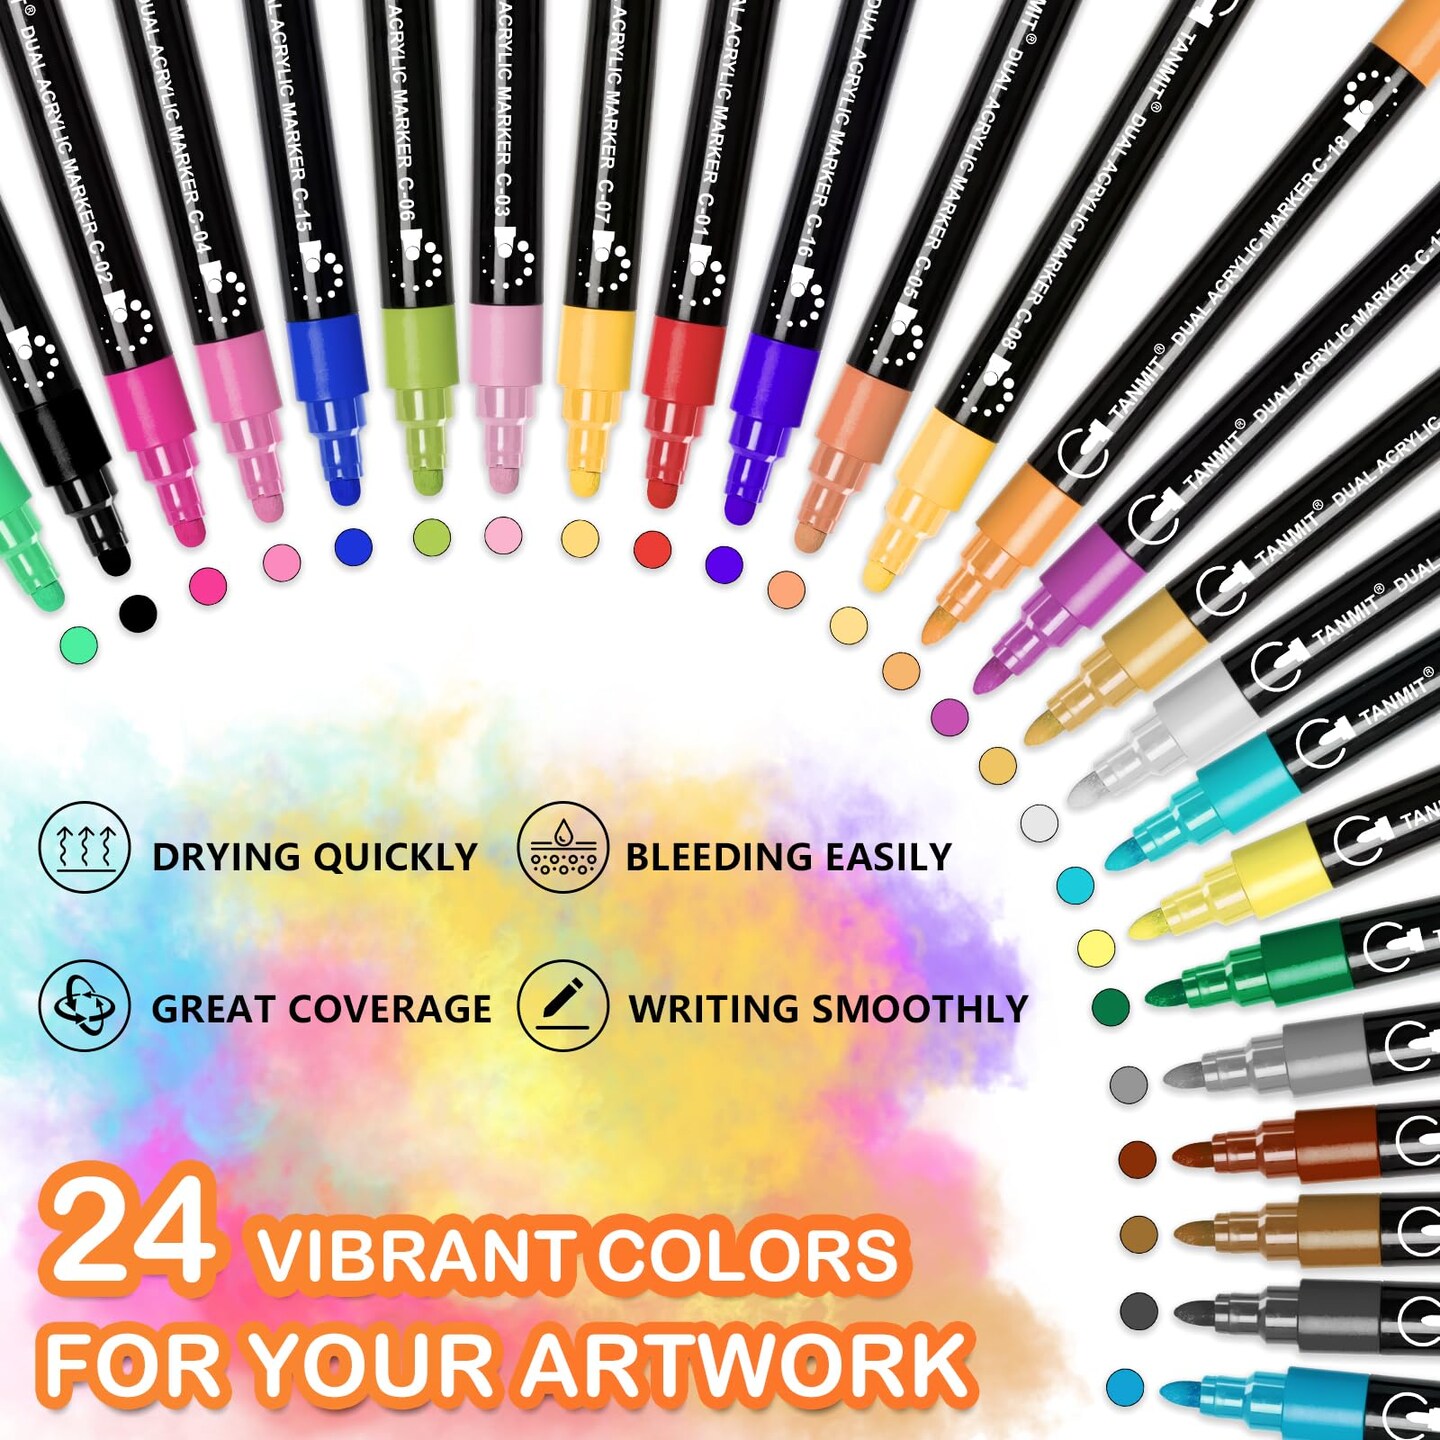 Acrylic Paint Pens Markers, 24 Colors Dual Tip Acrylic Paint Pens for Rock Painting, Wood, Canvas, Stone, Glass, Ceramic Surfaces, DIY Crafts Making Art Supplies (Round Tip and Fine Tip)